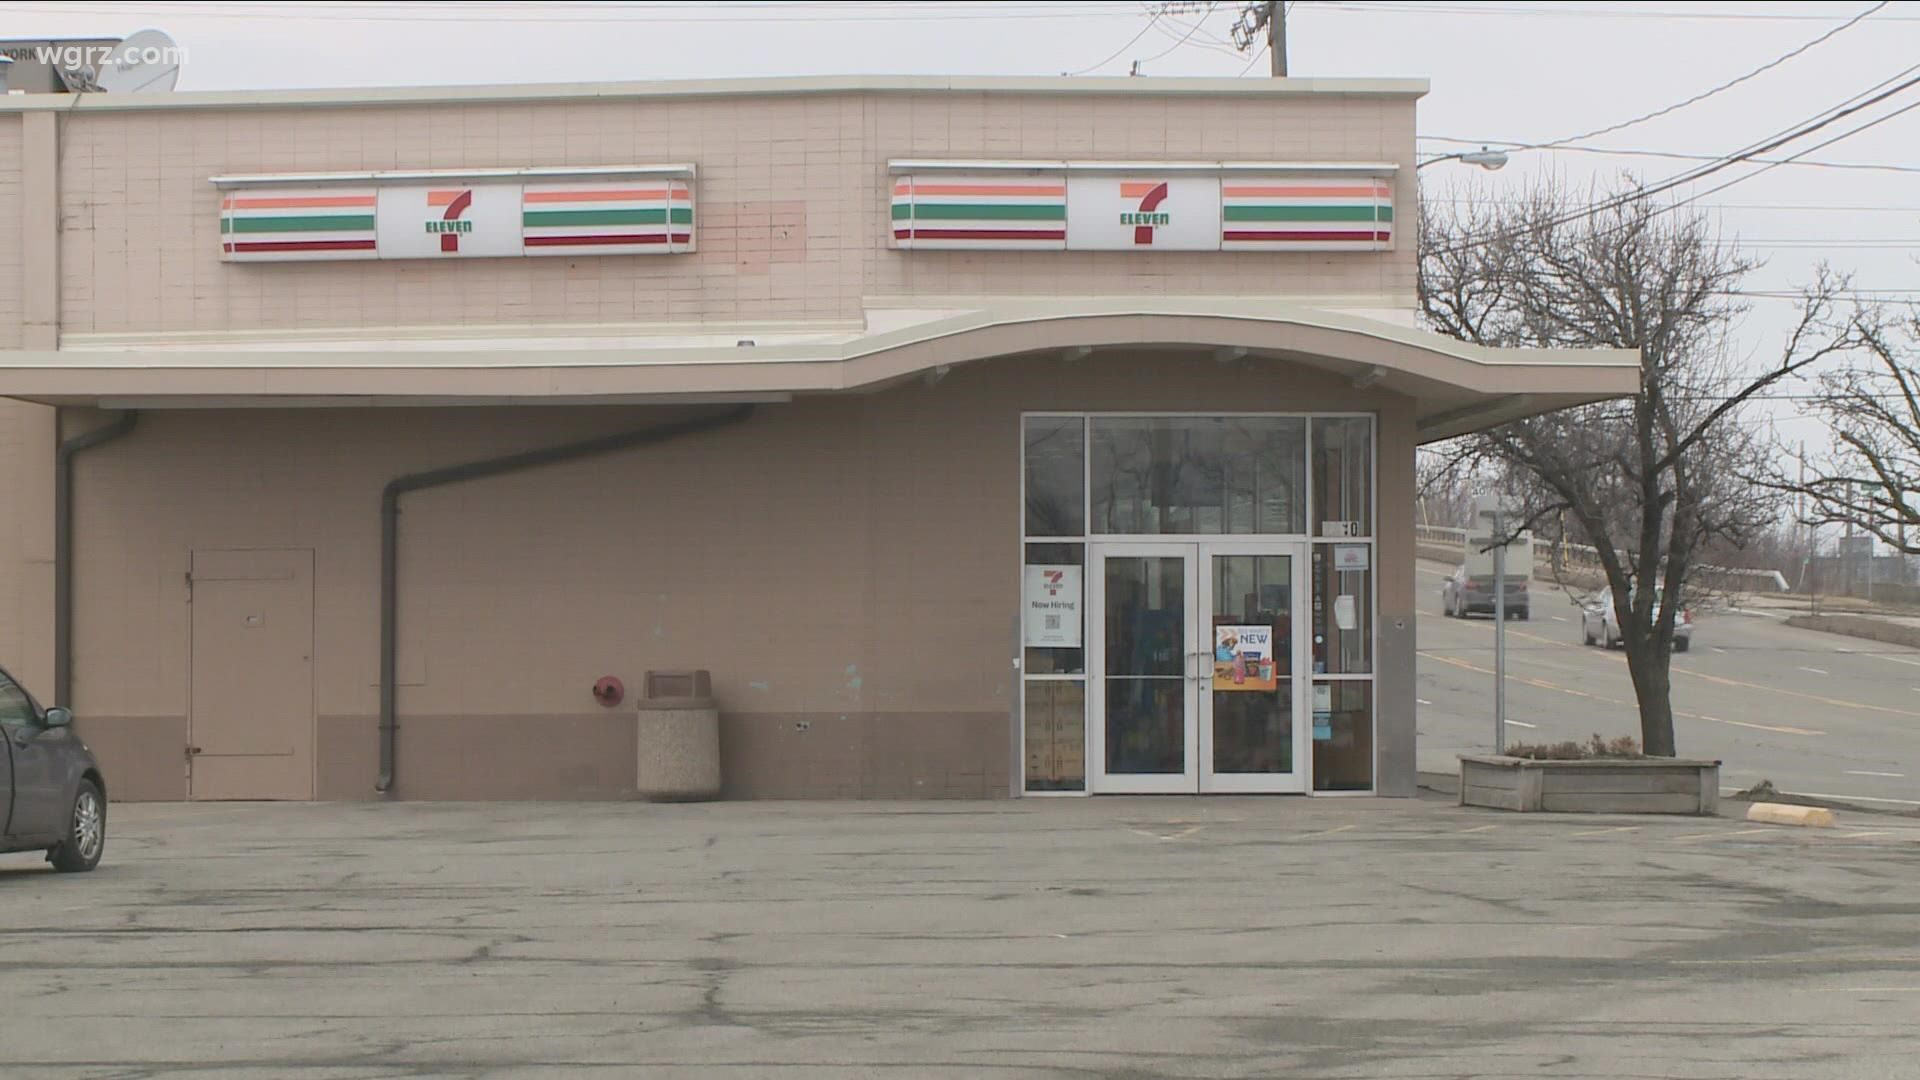 36 Year Old Niagara Falls Man Arrested Charged In 7 Eleven Shooting 